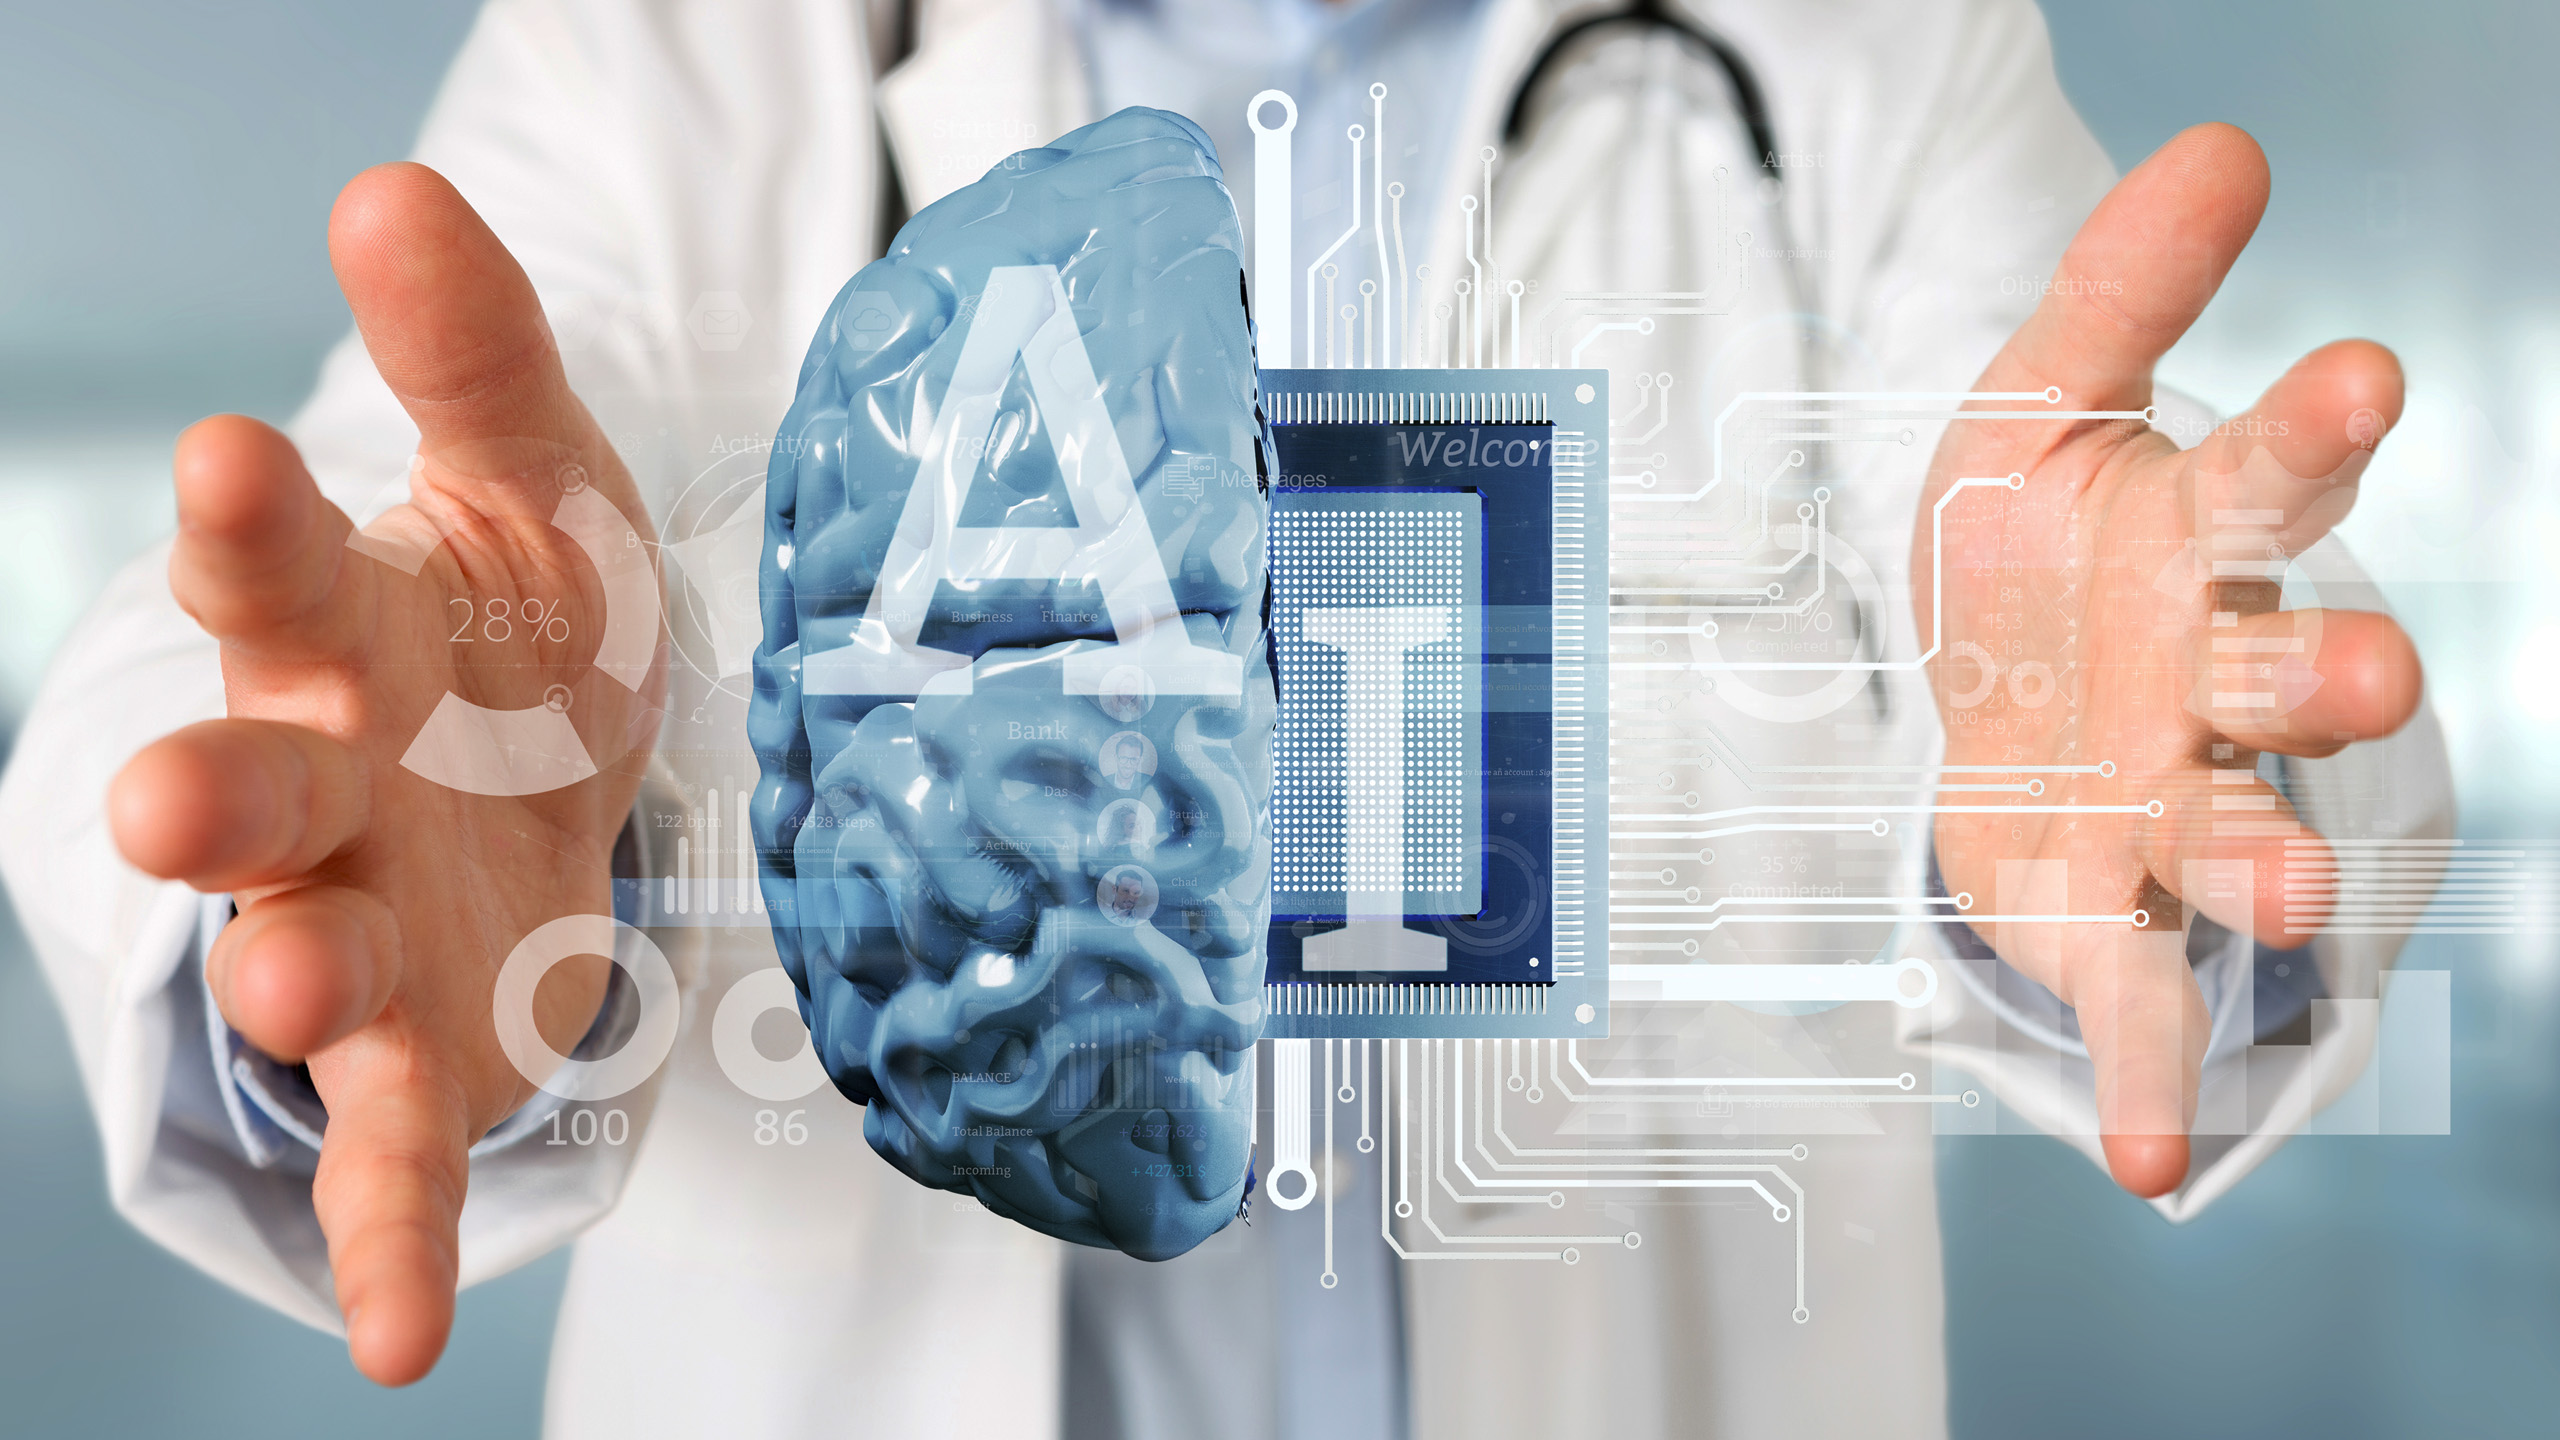 Artificial Intelligence and Machine Learning in the Healthcare Industry